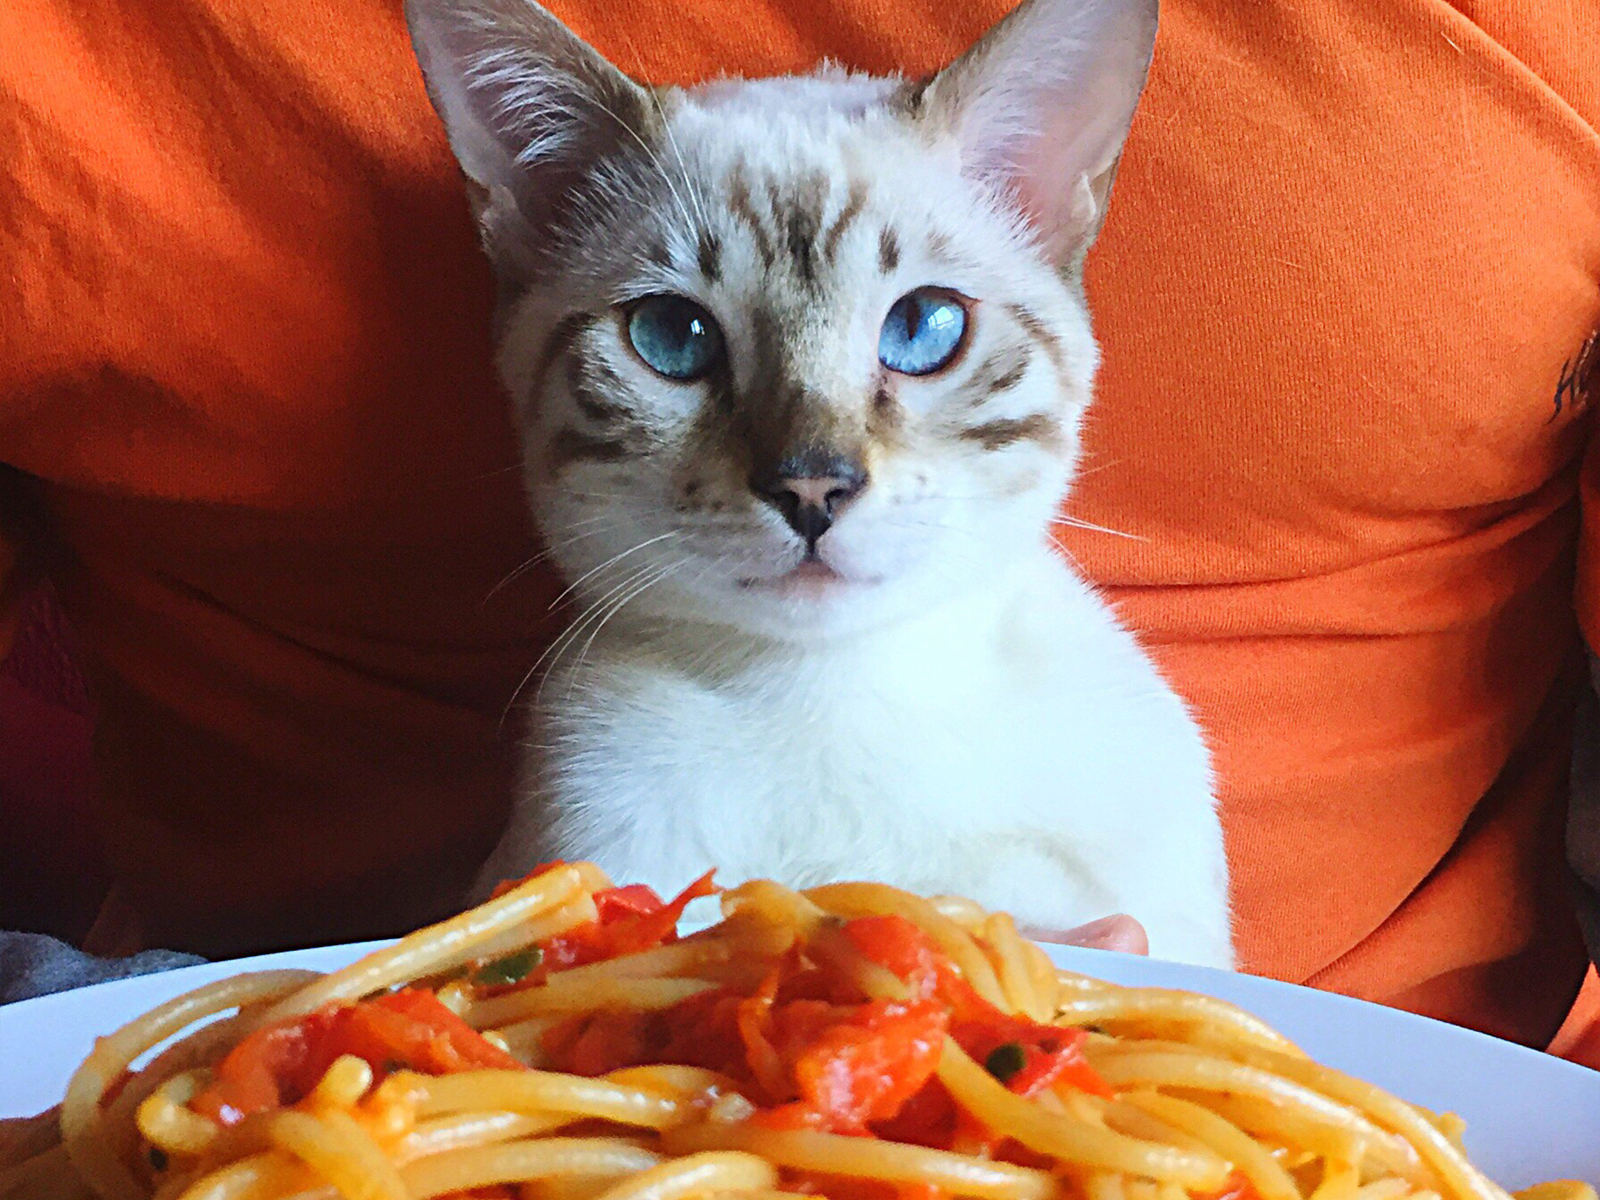 At the Spay-ghetti Fundraiser, you can purchase spaghetti dinners to help East End cats—what a sweet deal!